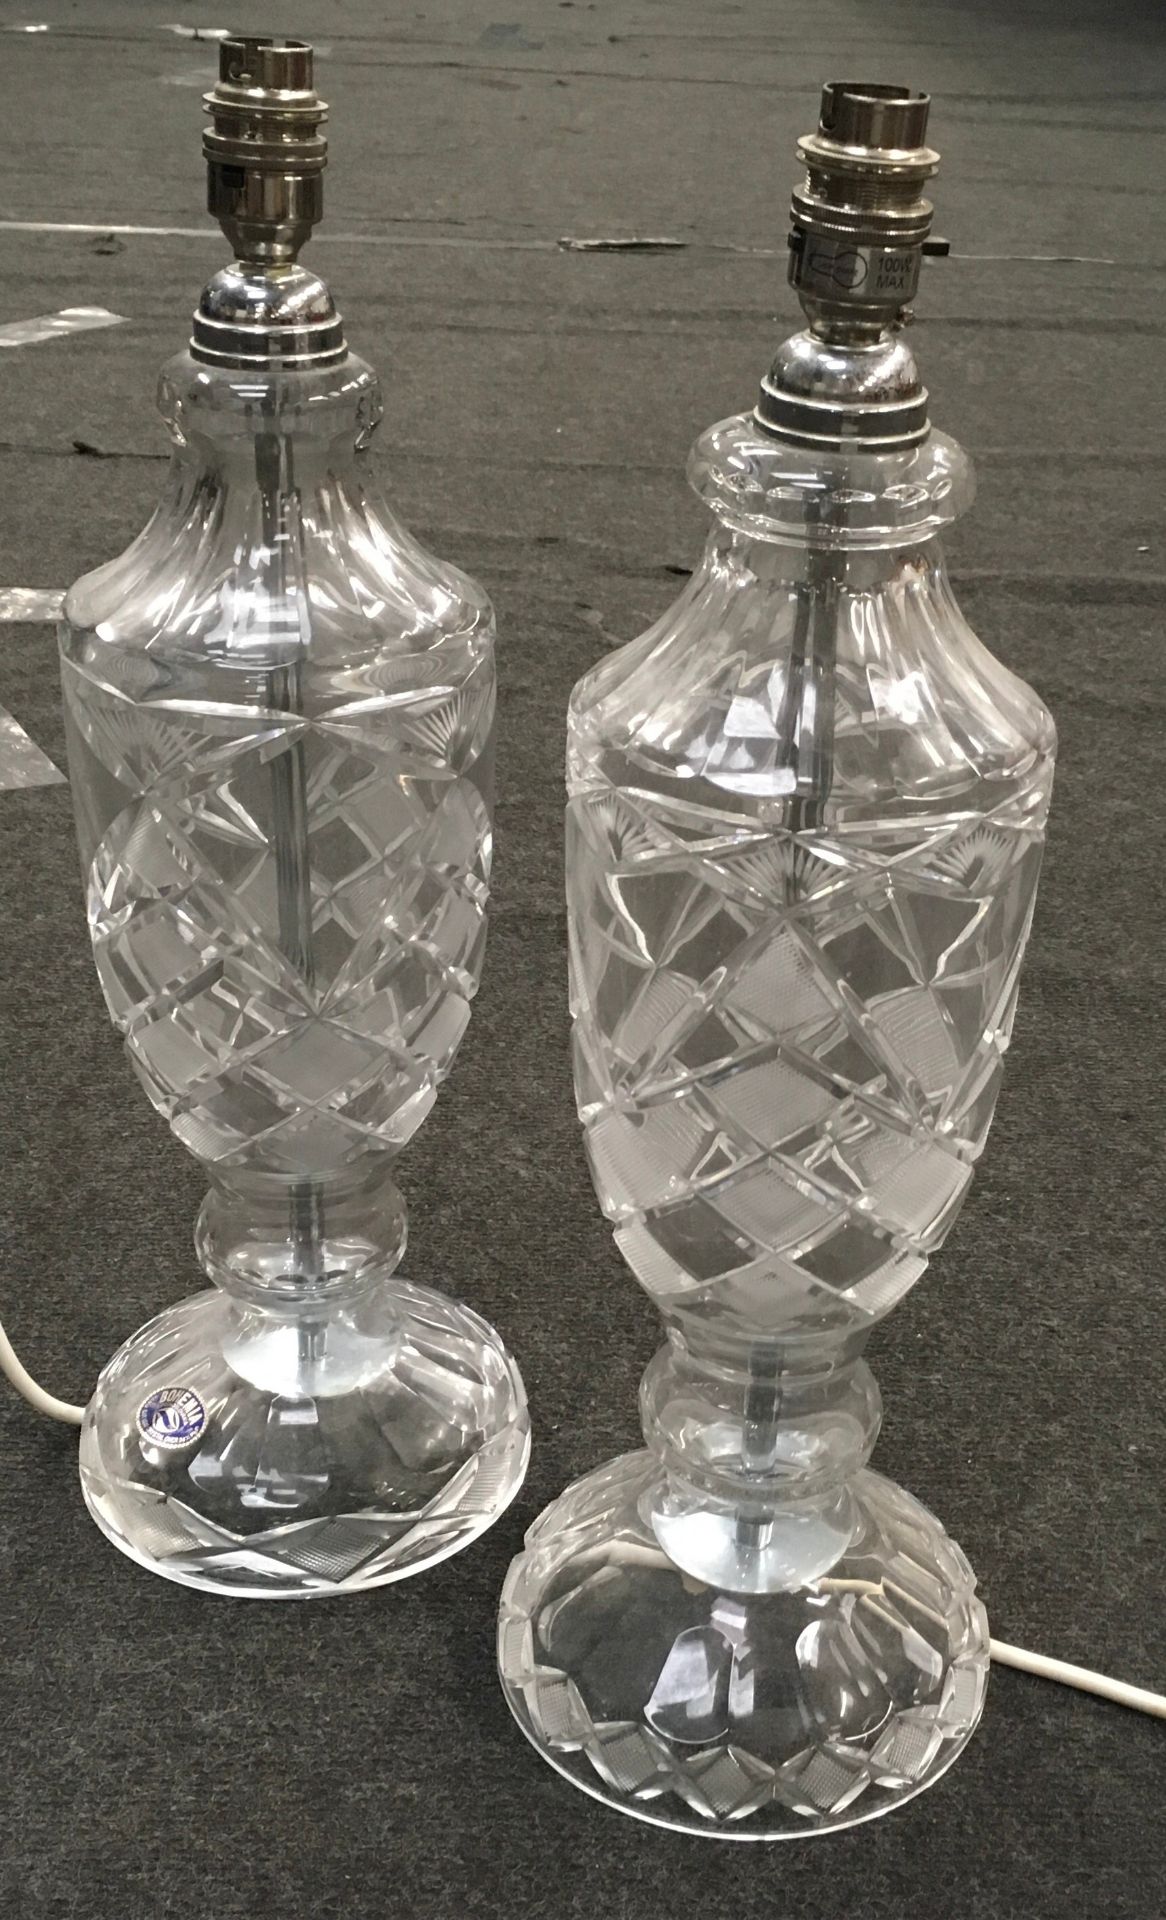 Quality pair of tall Bohemia cut lead crystal glass table lamps approx 18" tall - Image 4 of 4